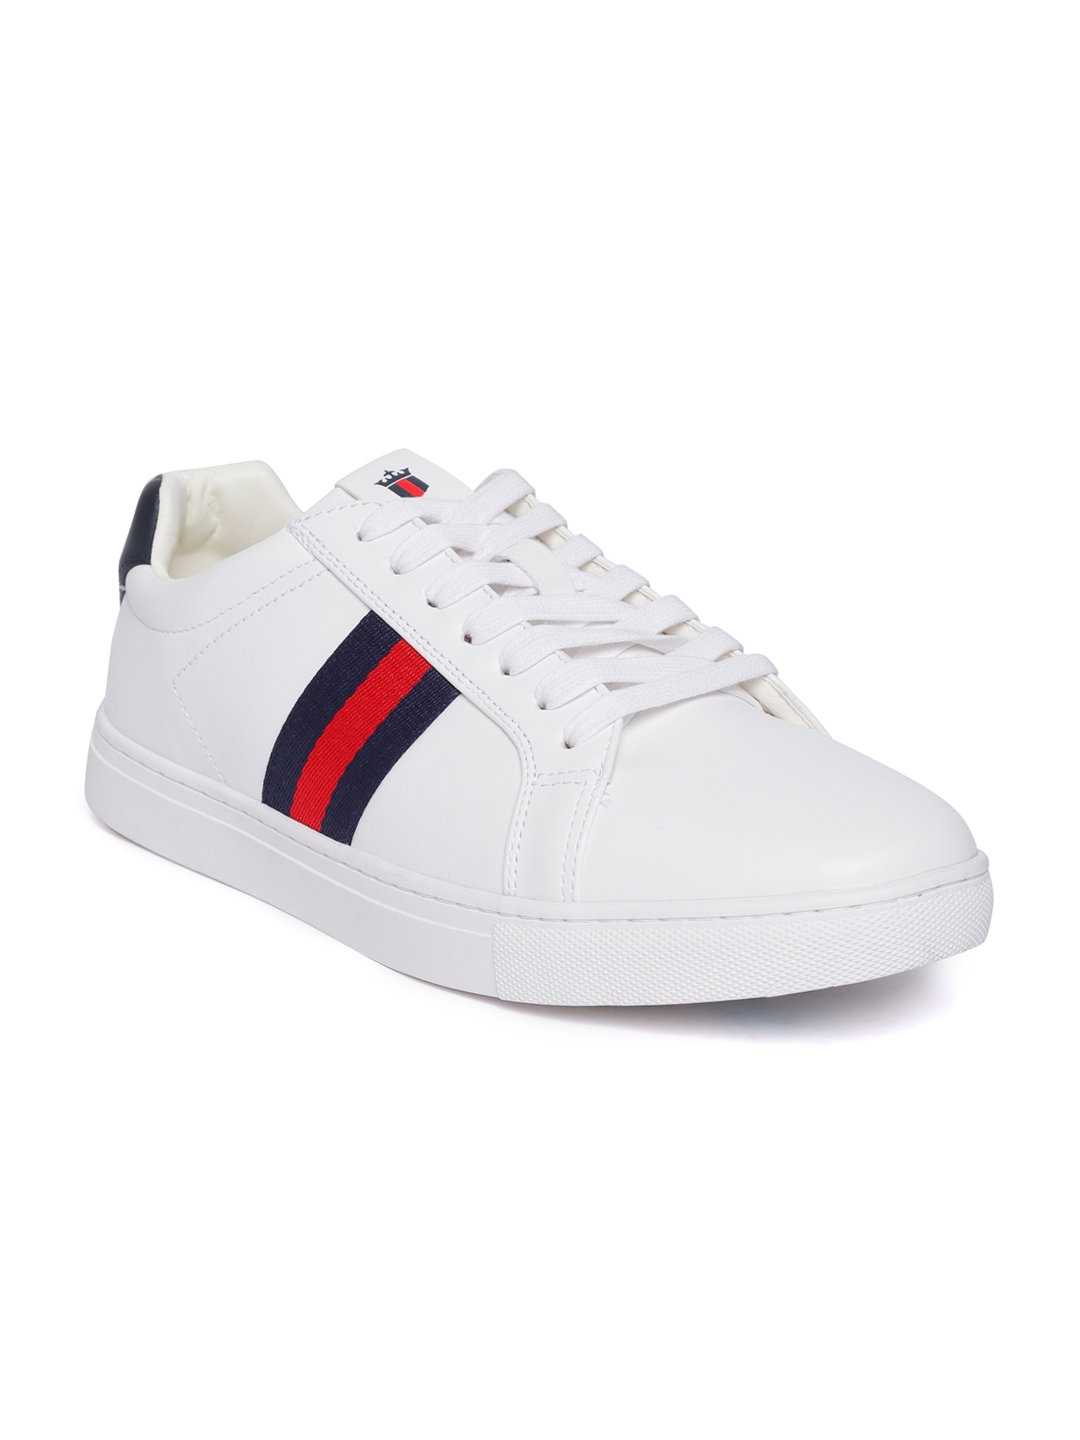 Louis Philippe Mens Sneakers in Bangalore - Dealers, Manufacturers &  Suppliers - Justdial